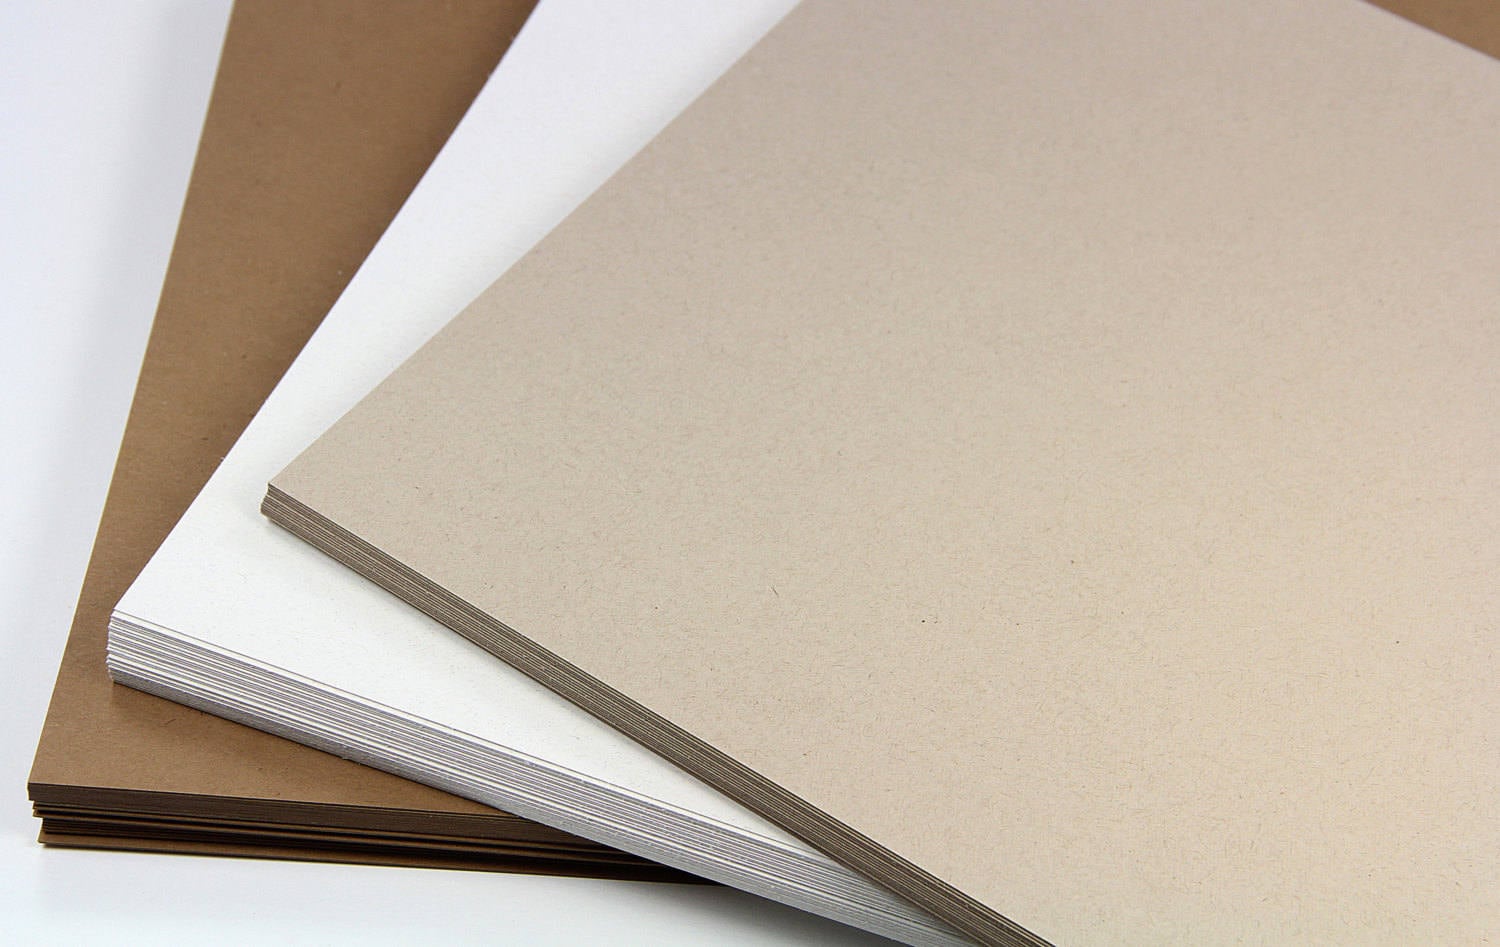 Kraft Recycled Cardstock Paper 80lb Printable Card Stock 25 Sheets